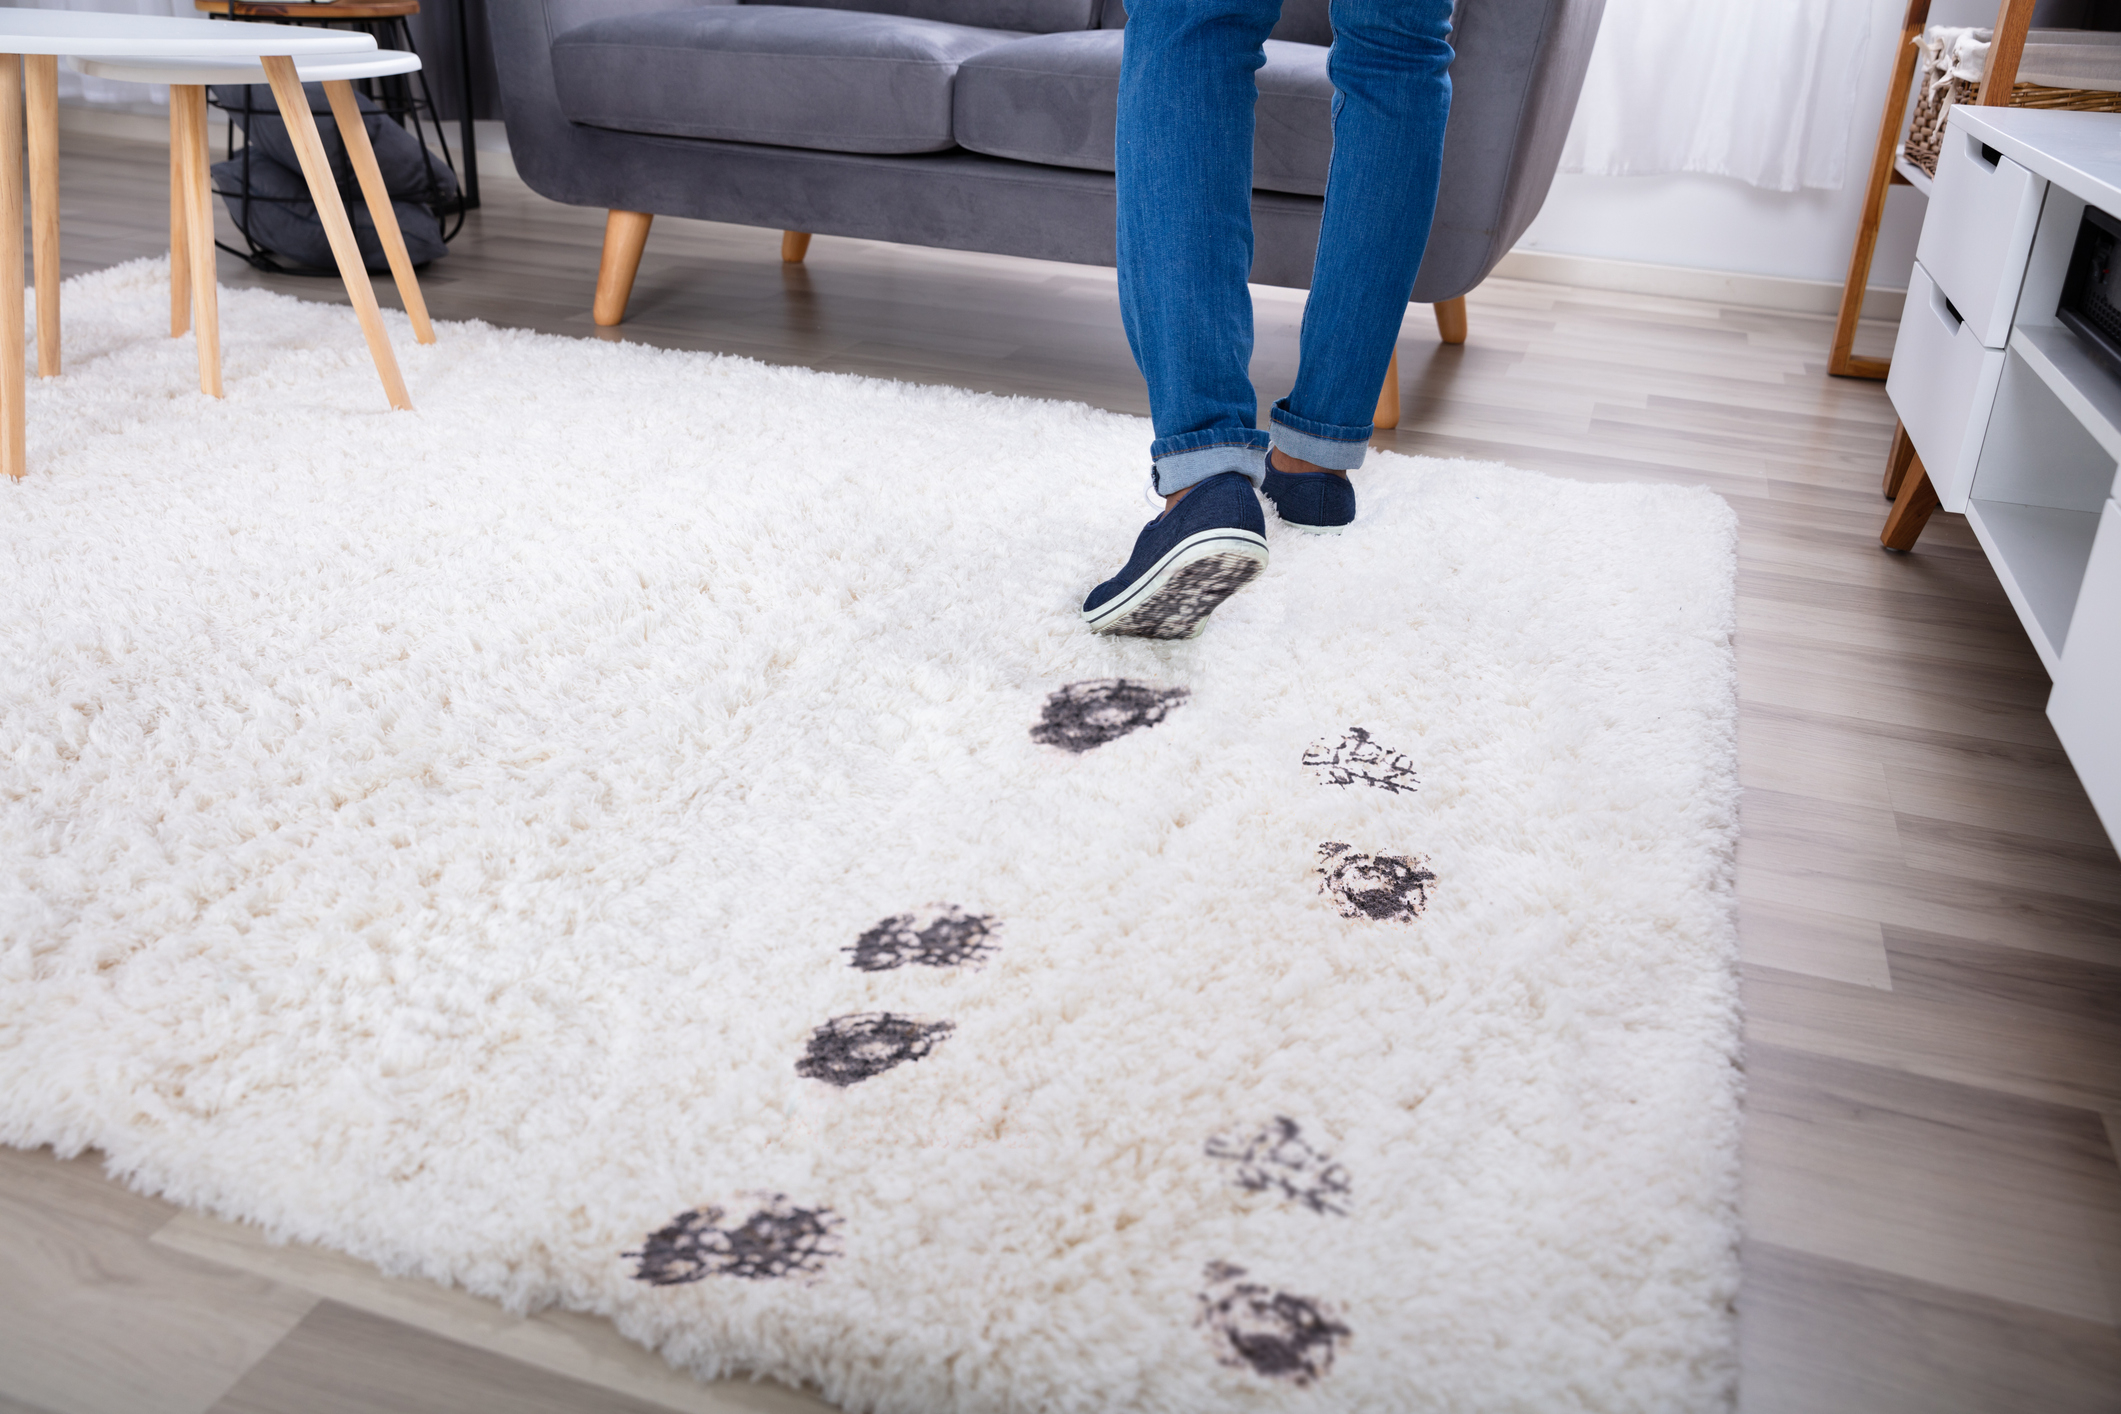 Person stepping on a white rug with muddy paw prints, in a home setting